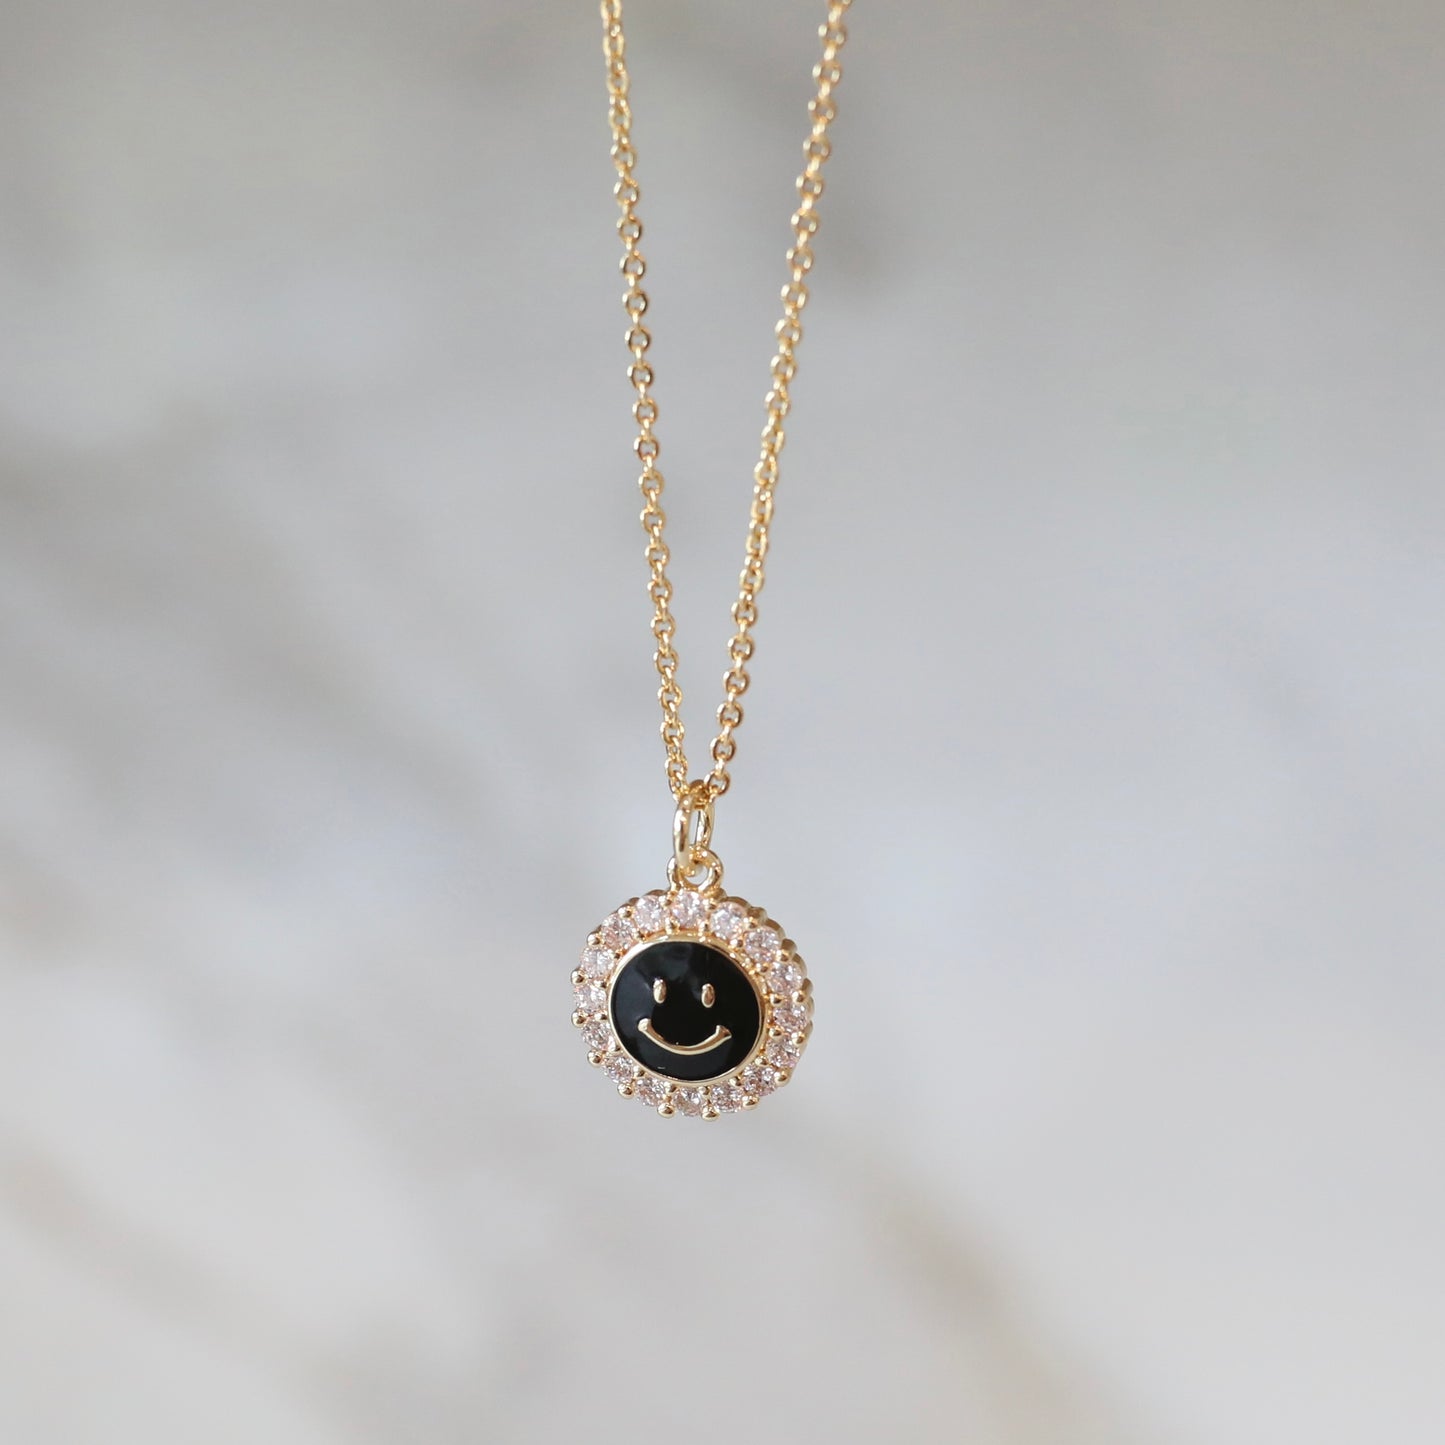 Smiley Face Necklace with Cubic Zirconia - Black